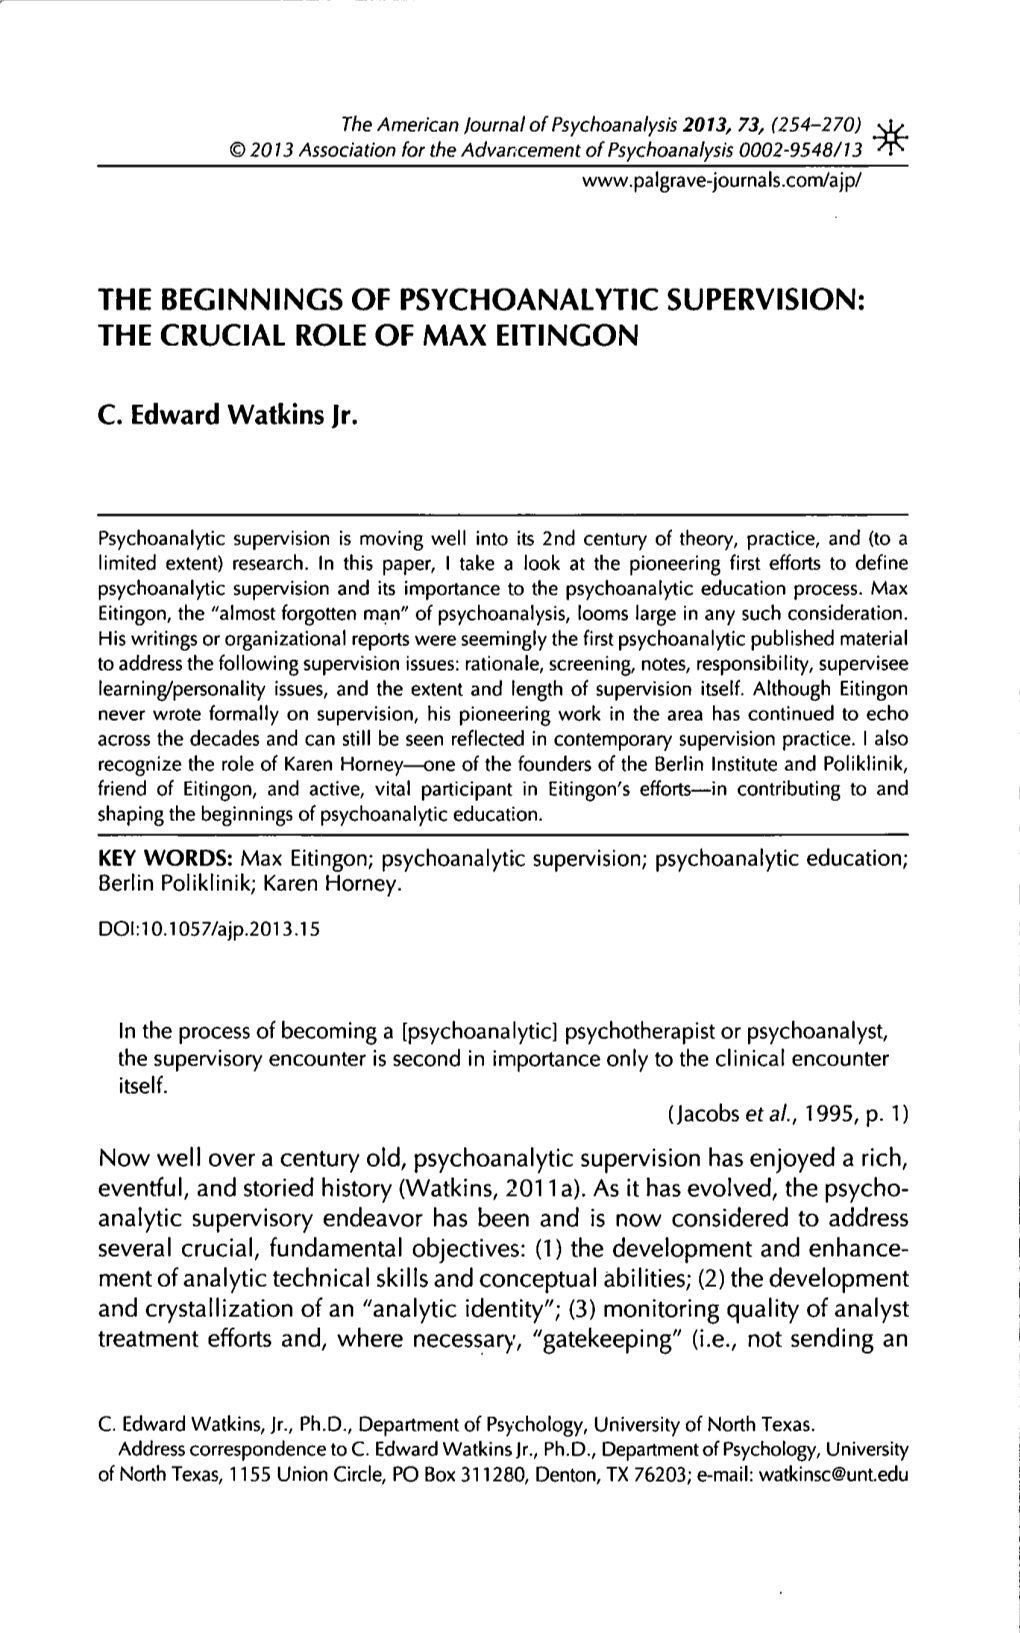 The Beginnings of Psychoanalytic Supervision: the Crucial Role of Max Eitingon